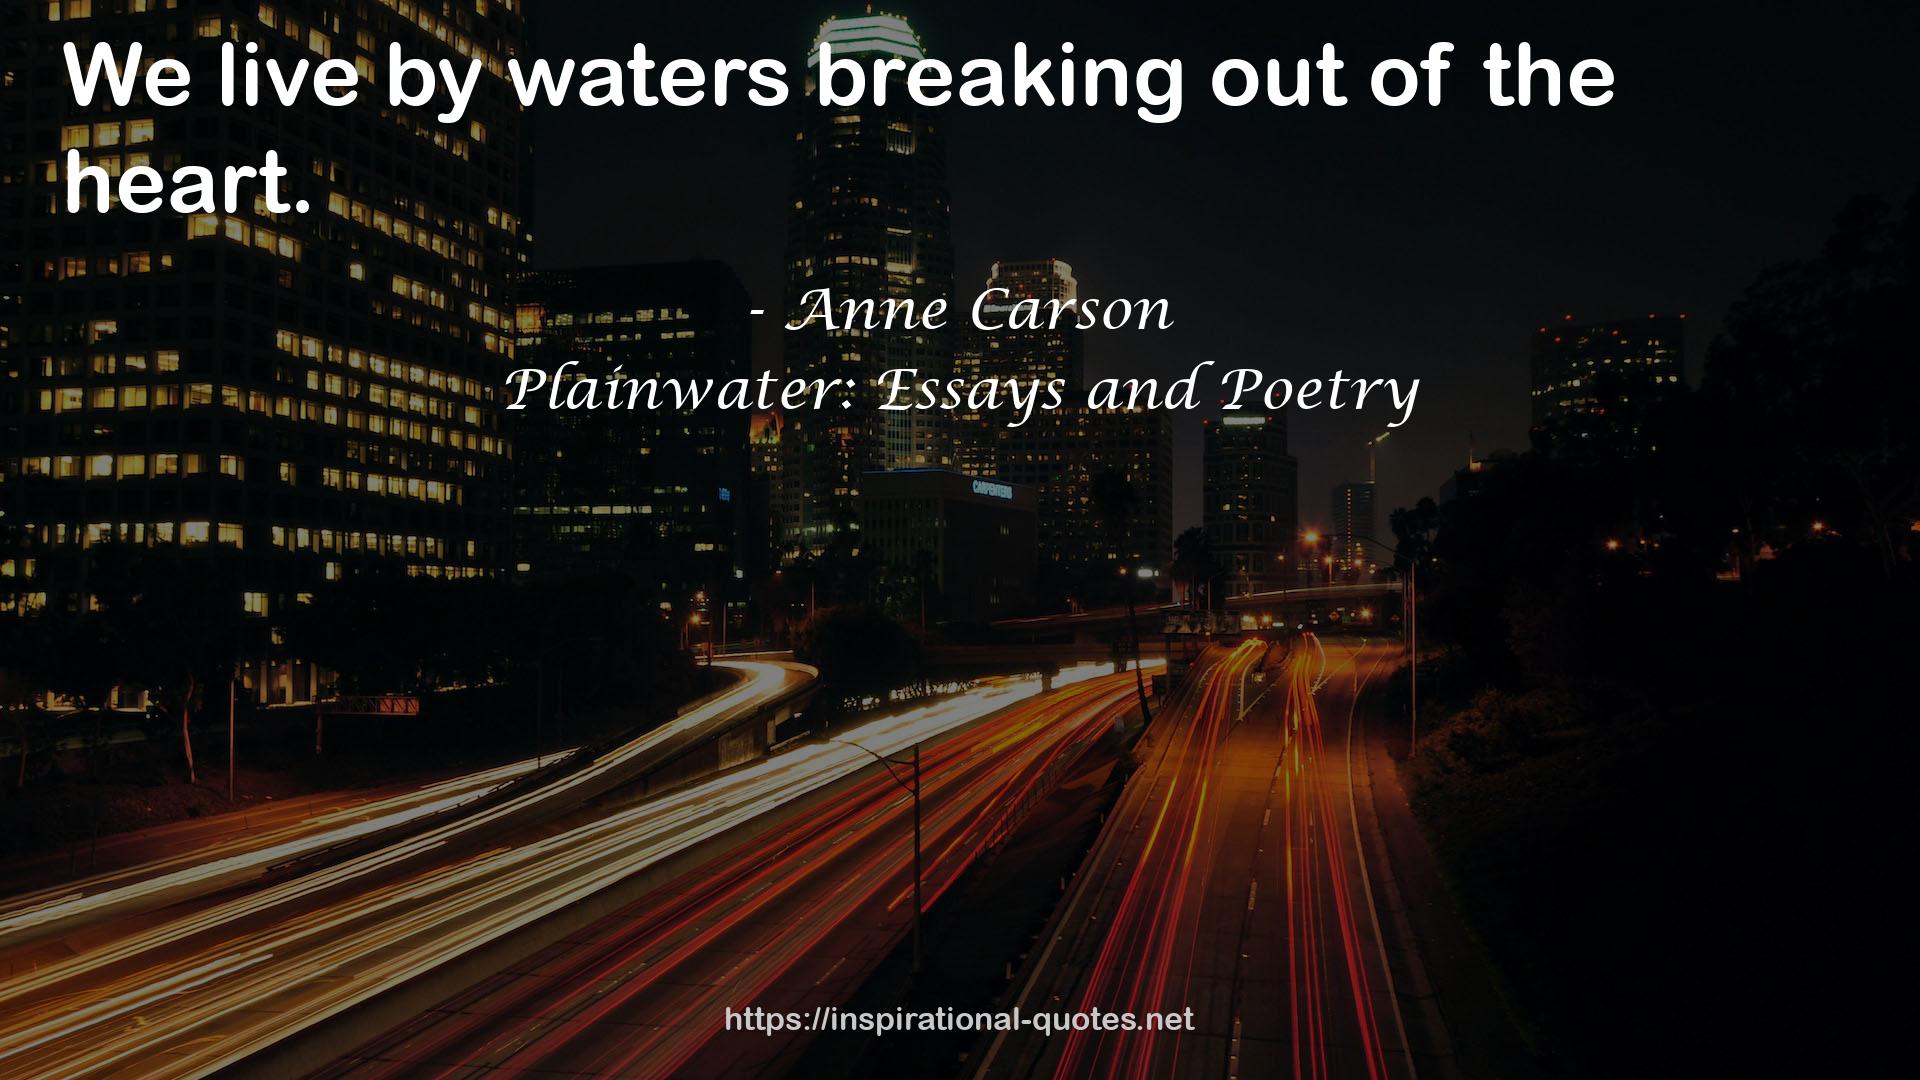 Plainwater: Essays and Poetry QUOTES